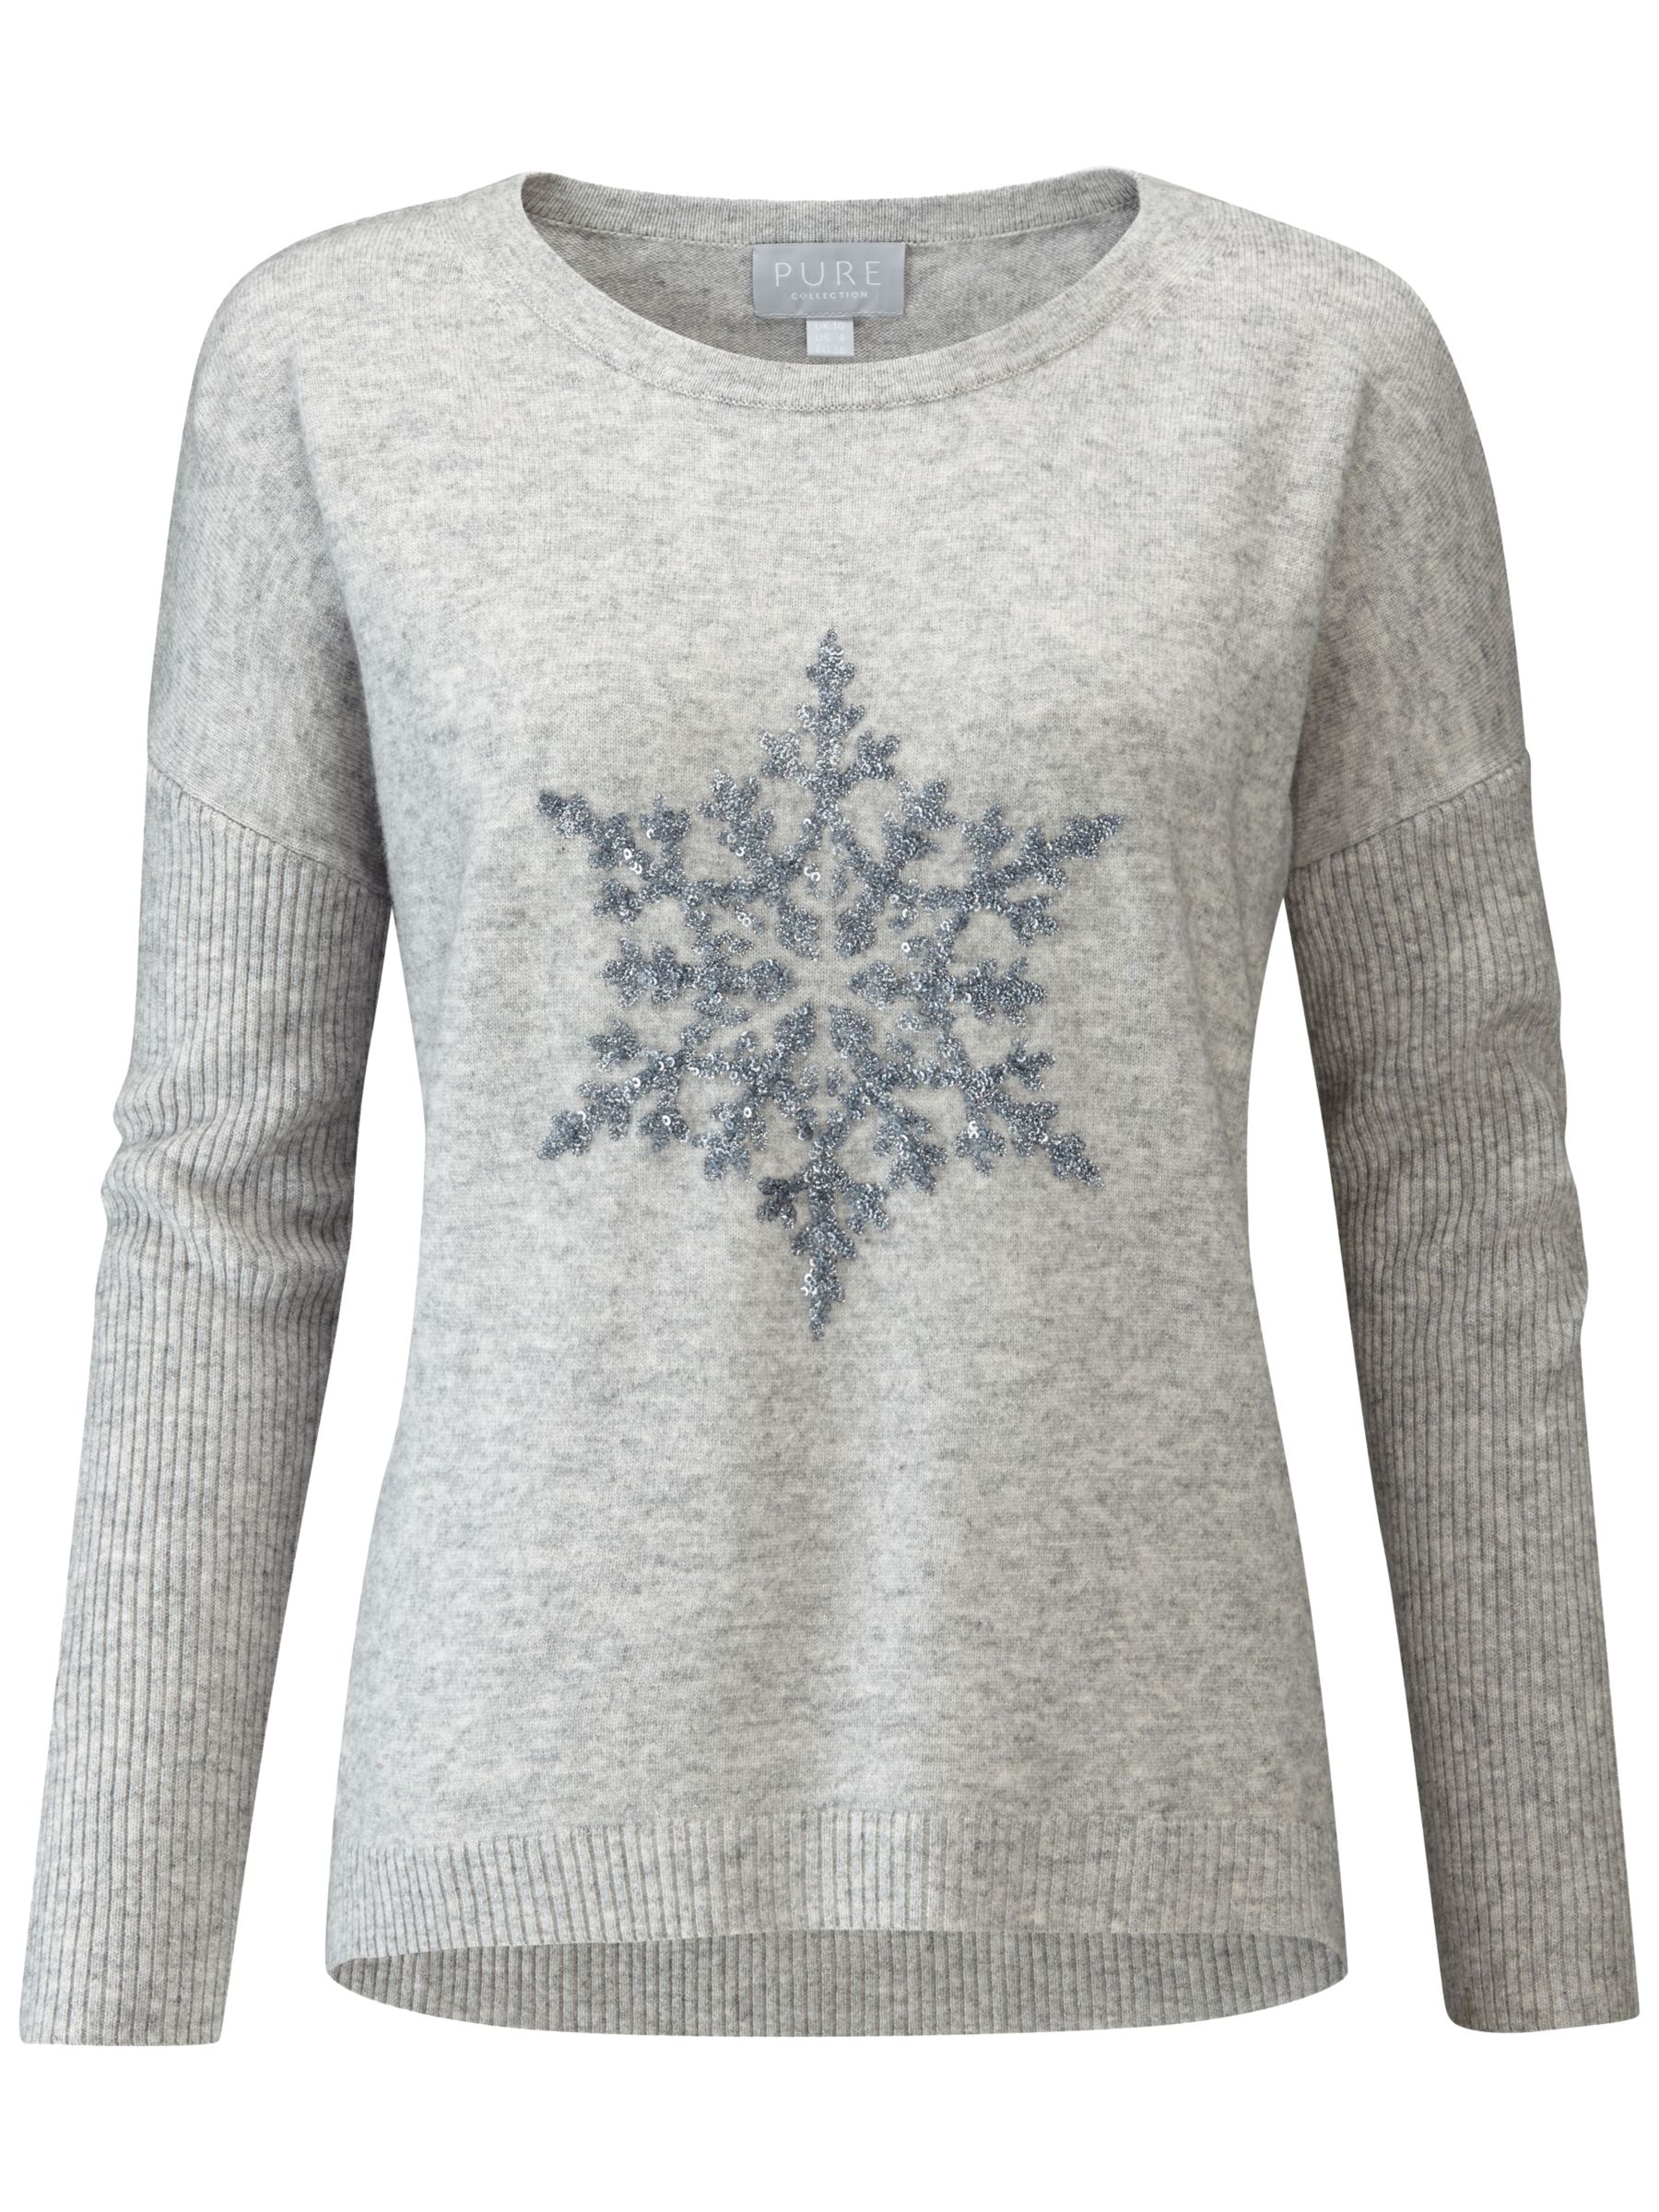 Pure Collection Sparkle Snowflake Dipped Hem Jumper, Grey, 18